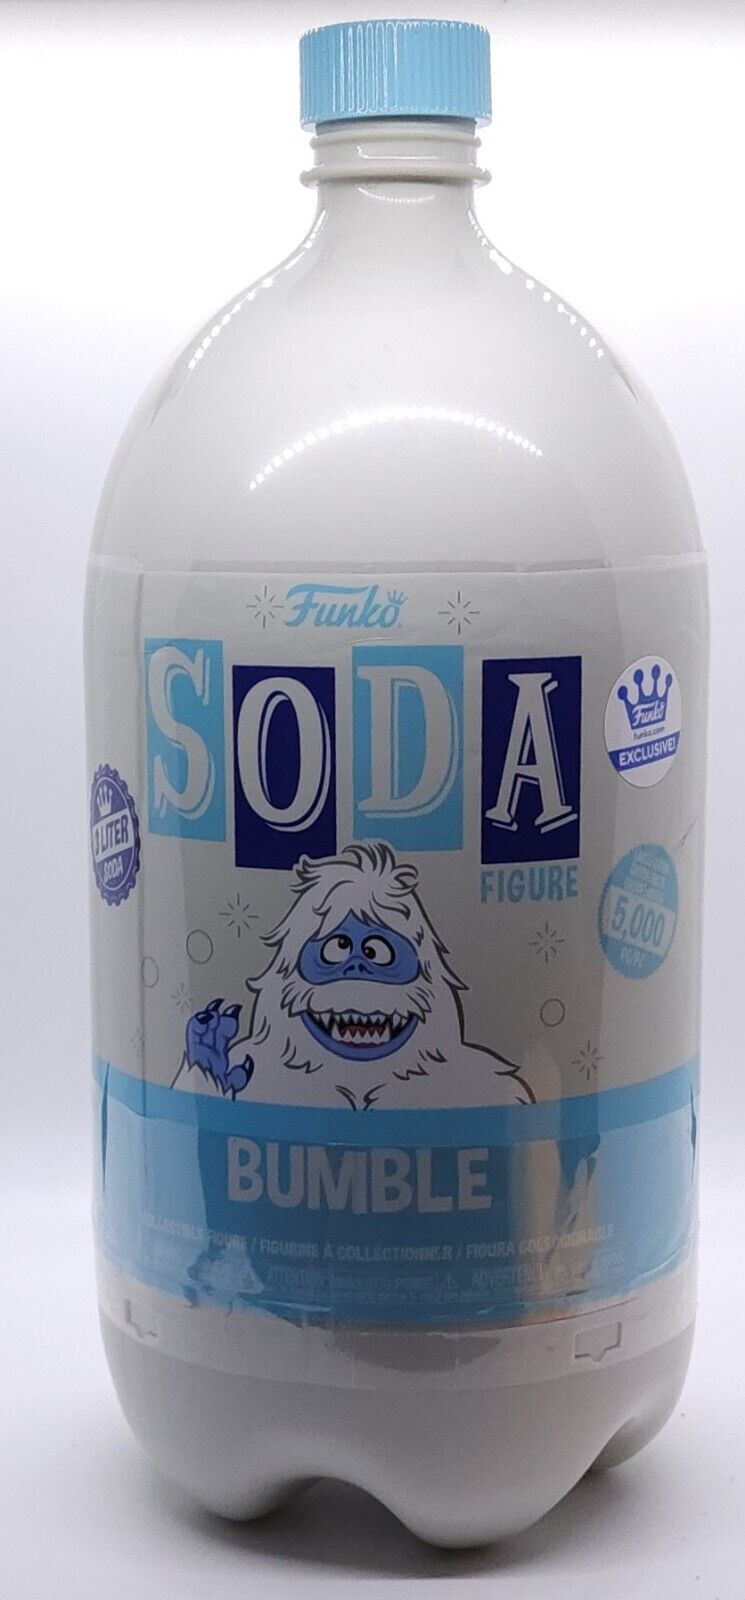 Funko SODA 3 Liter Rudolph the Red Nosed Reindeer Bumble 5k LE UNOPENED